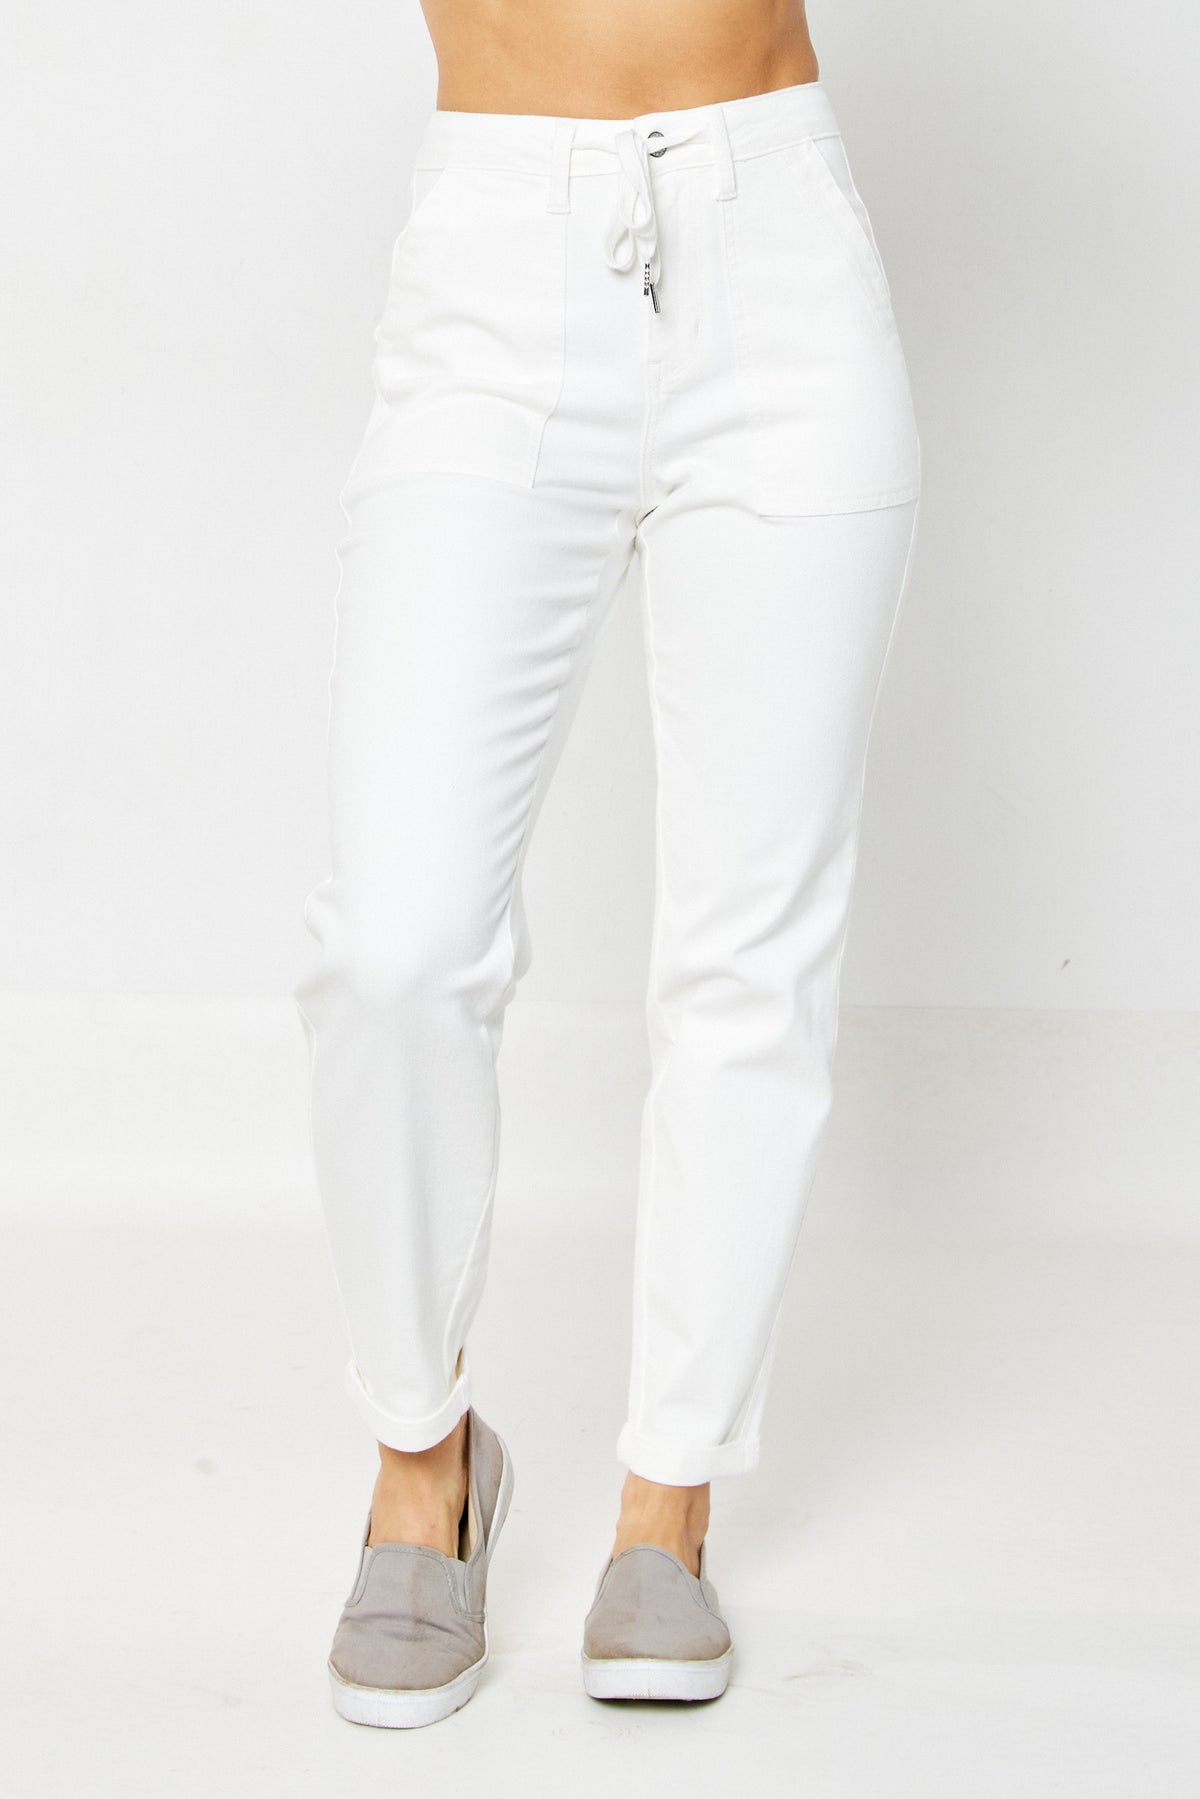 judy blue high waisted garmet dyed cuffed jogger pants in white-front